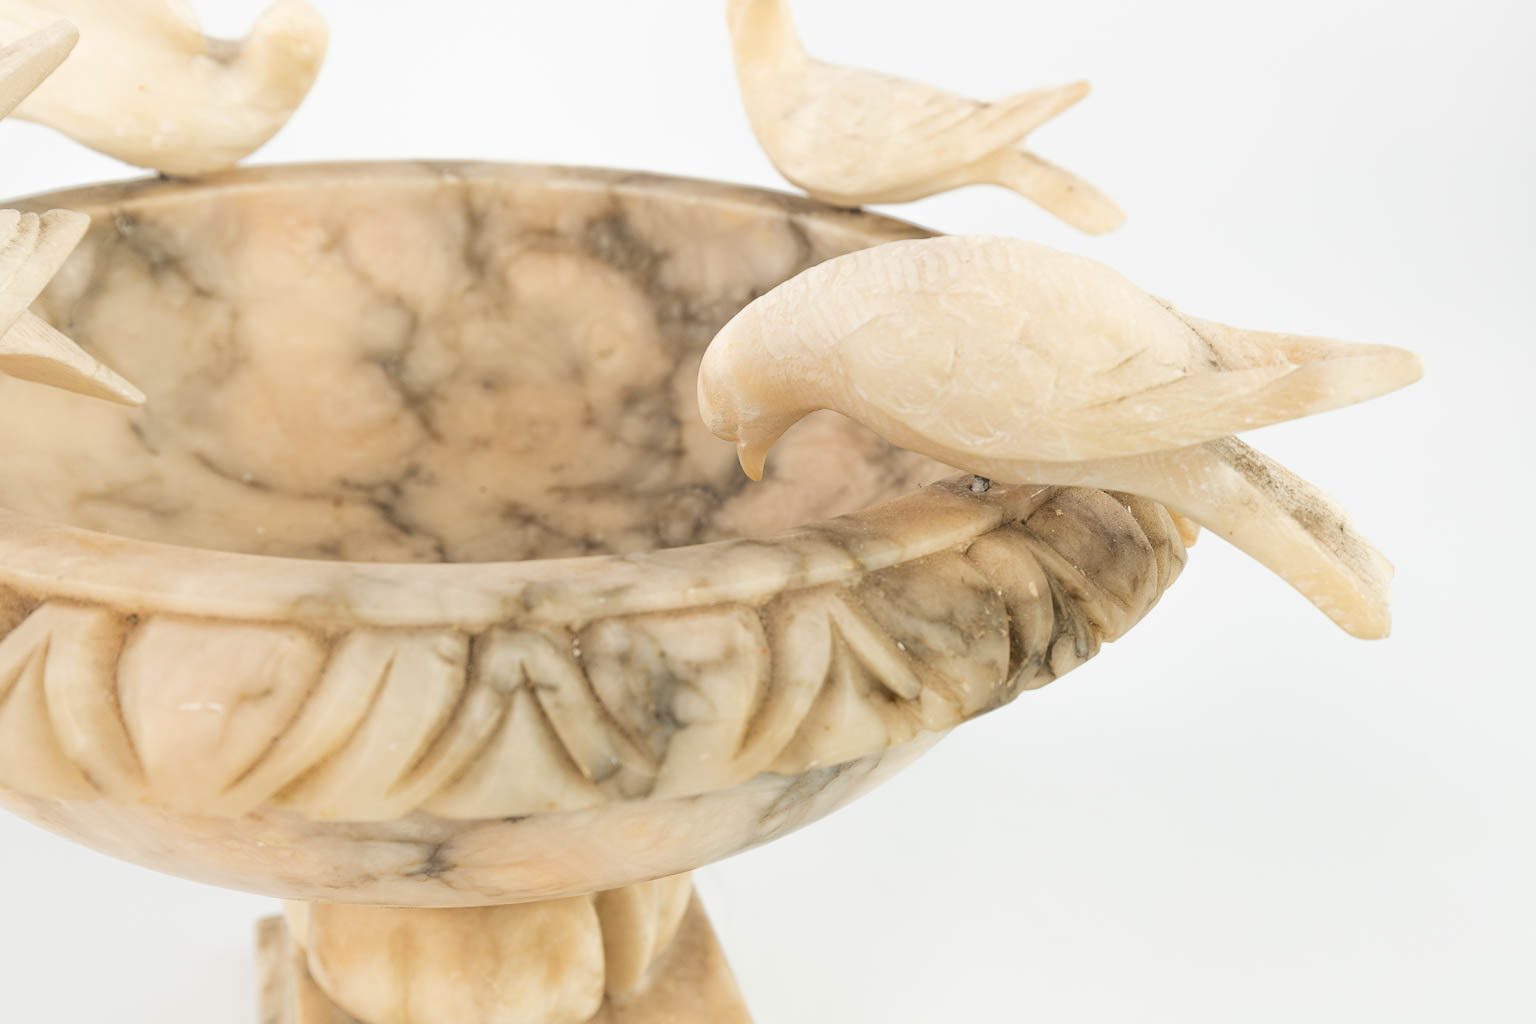 A drinking bowl made of alabaster with figurines of birds. (H:29cm)